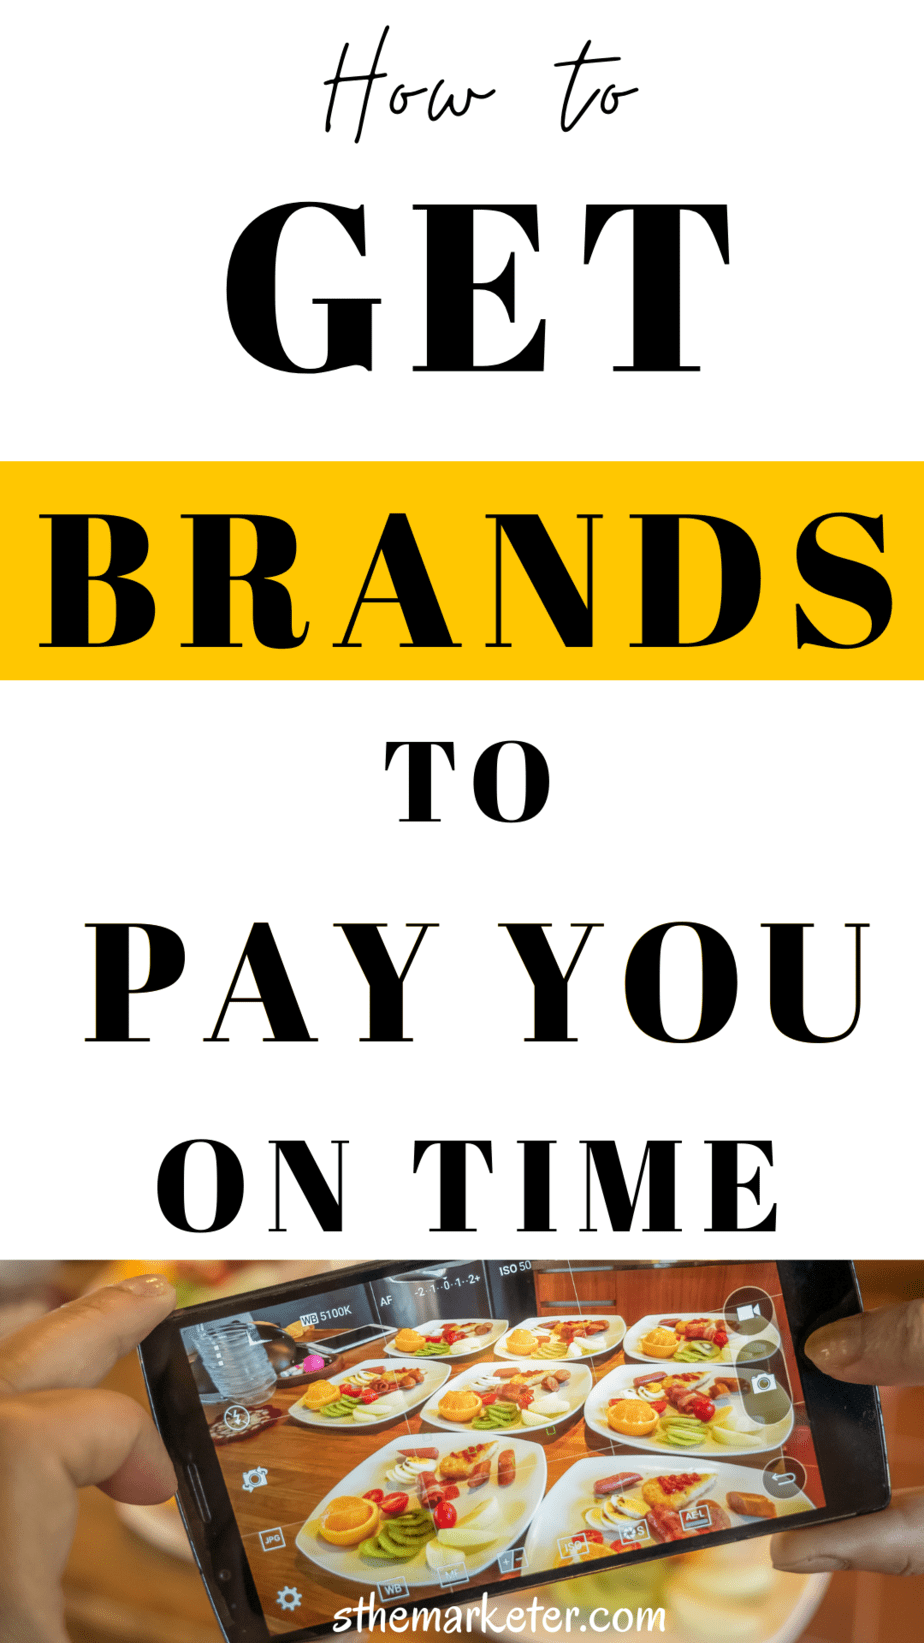 You are currently viewing How to Get Paid on Time By Brands as an Influencer